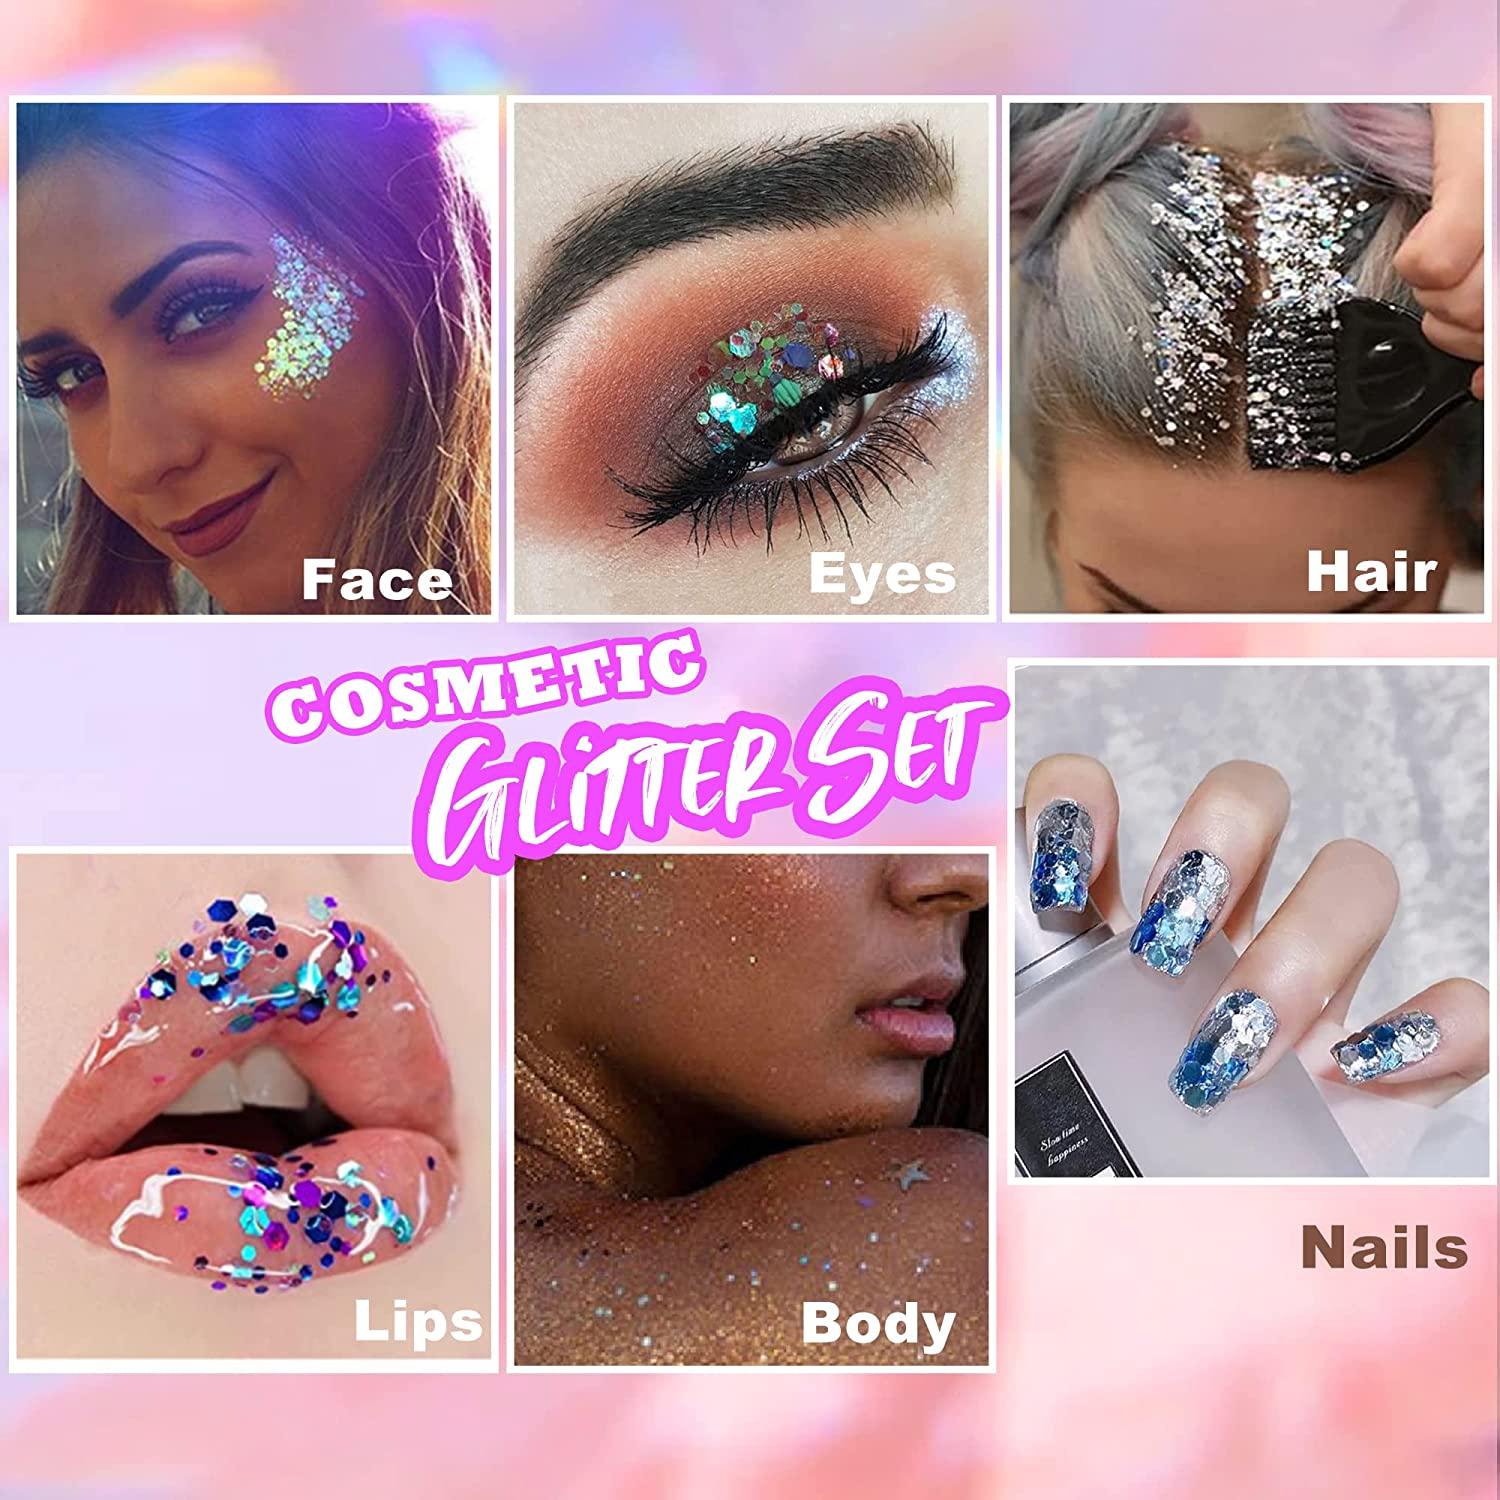 BELLEBOOST 12 Colors of Holographic Chunky Glitter No Glue Attached, 12 Pots Total 120g Multi-Shaped for Body Hair Face Eyes Make-Up, Nail Art and Bedazzling